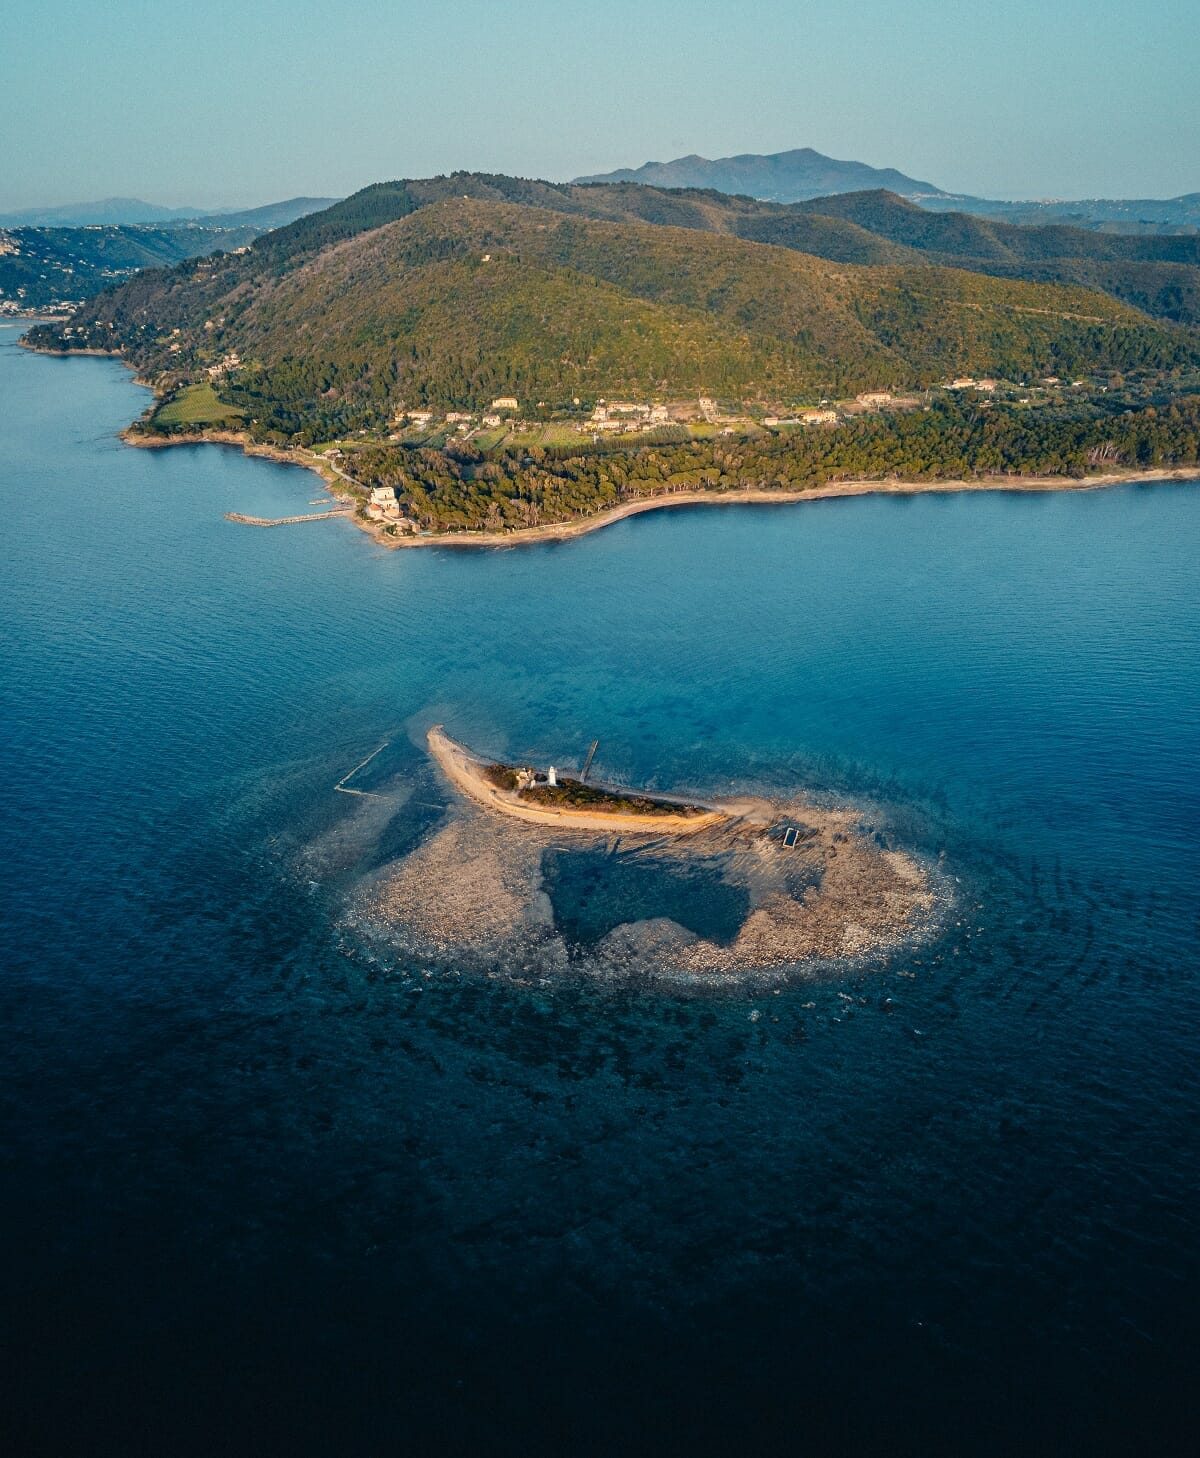 Areal view of Castellabate in the Cilento region of southern italy with water and island